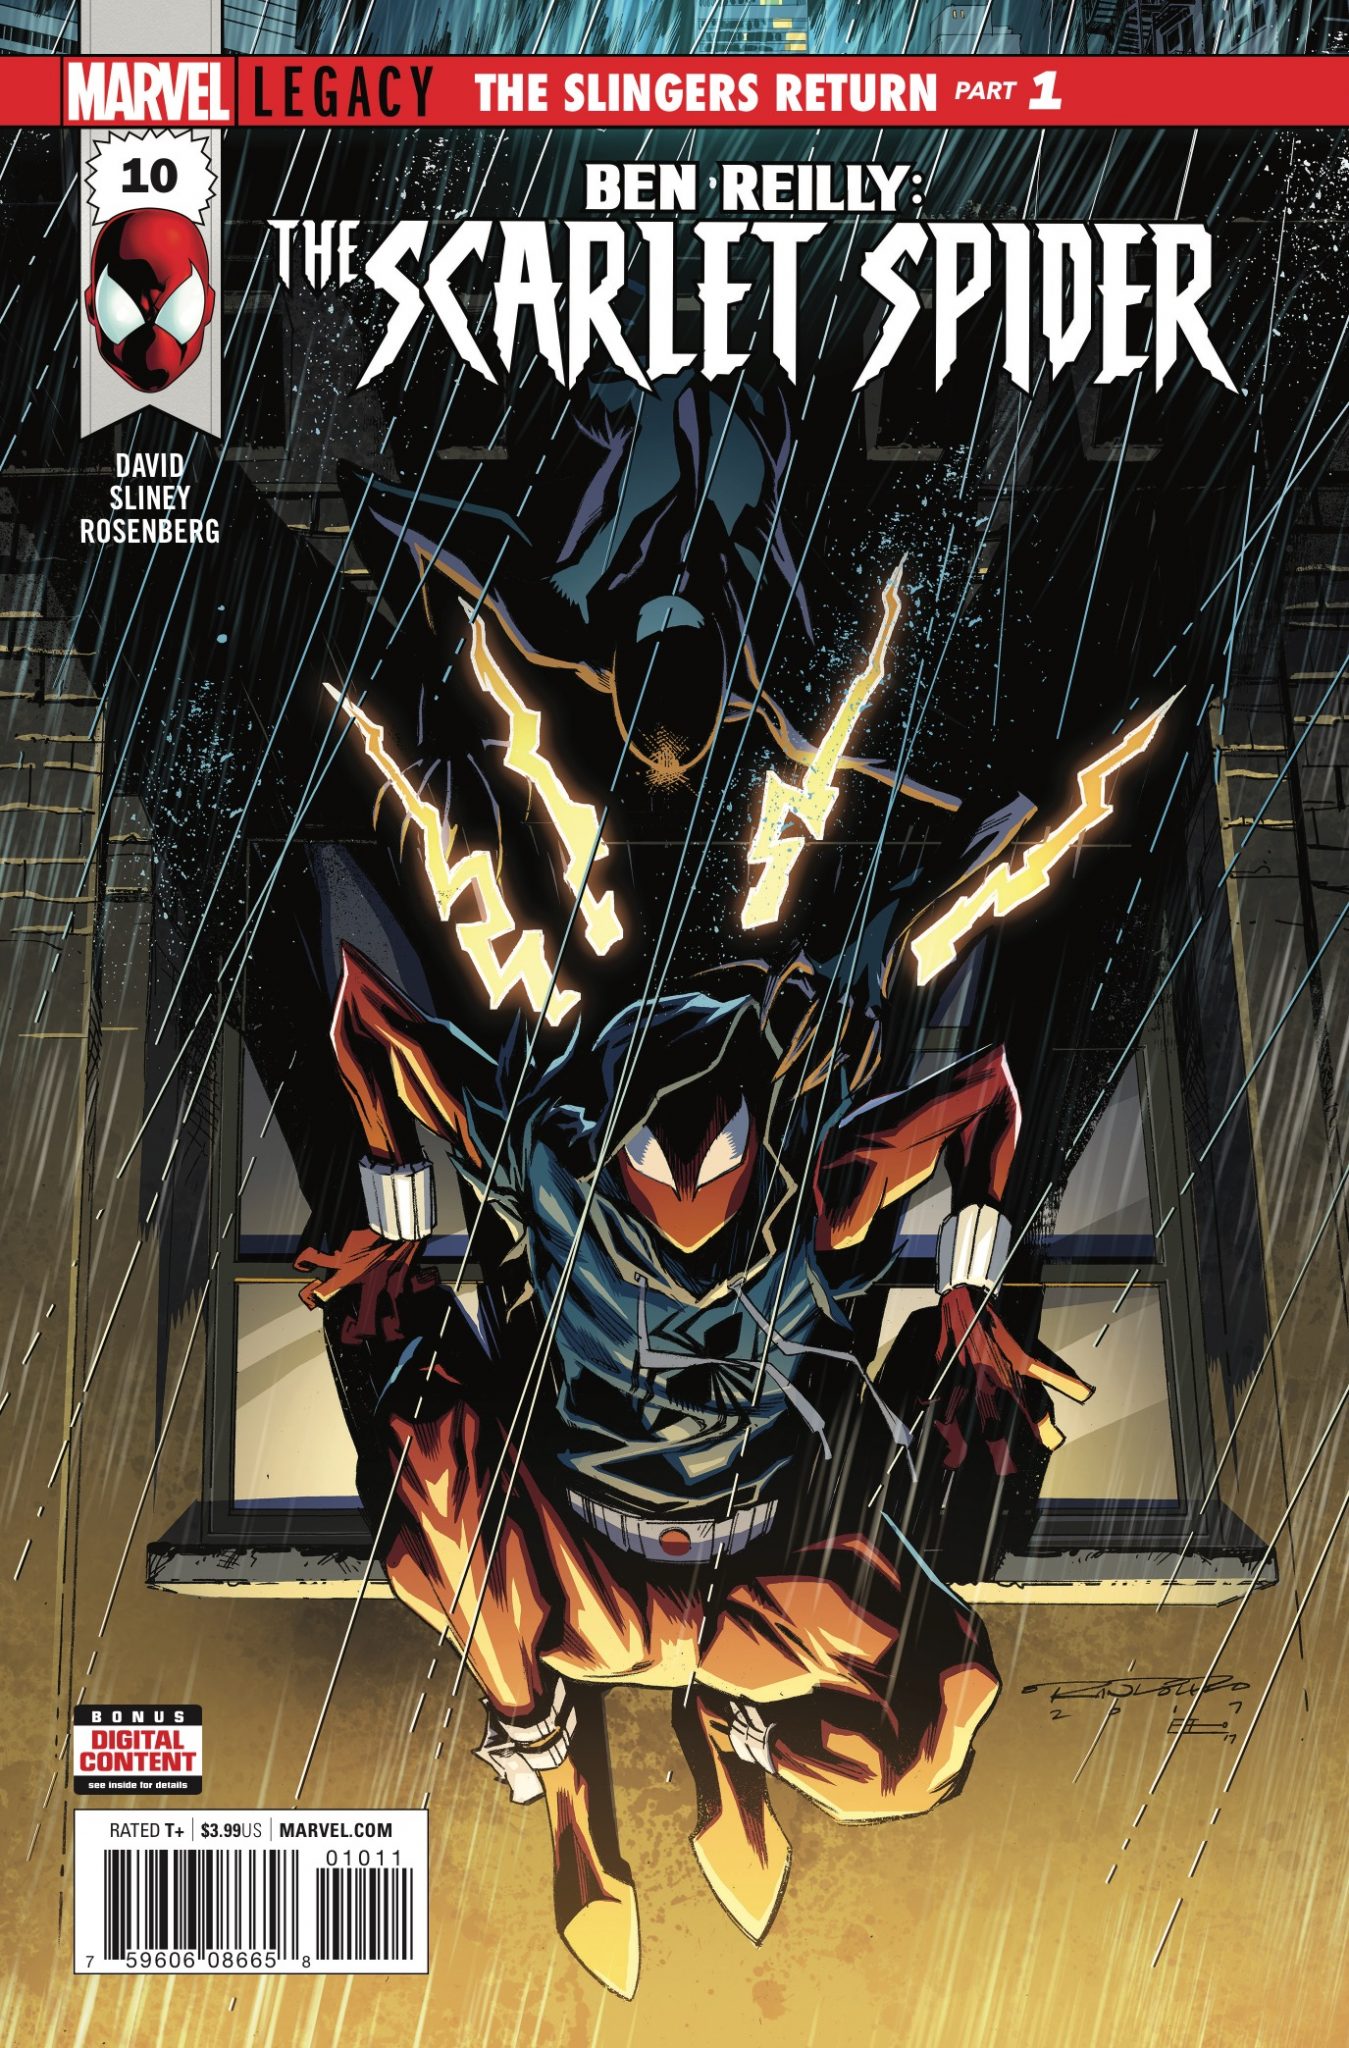 Marvel Preview: Ben Reilly: The Scarlet Spider #10